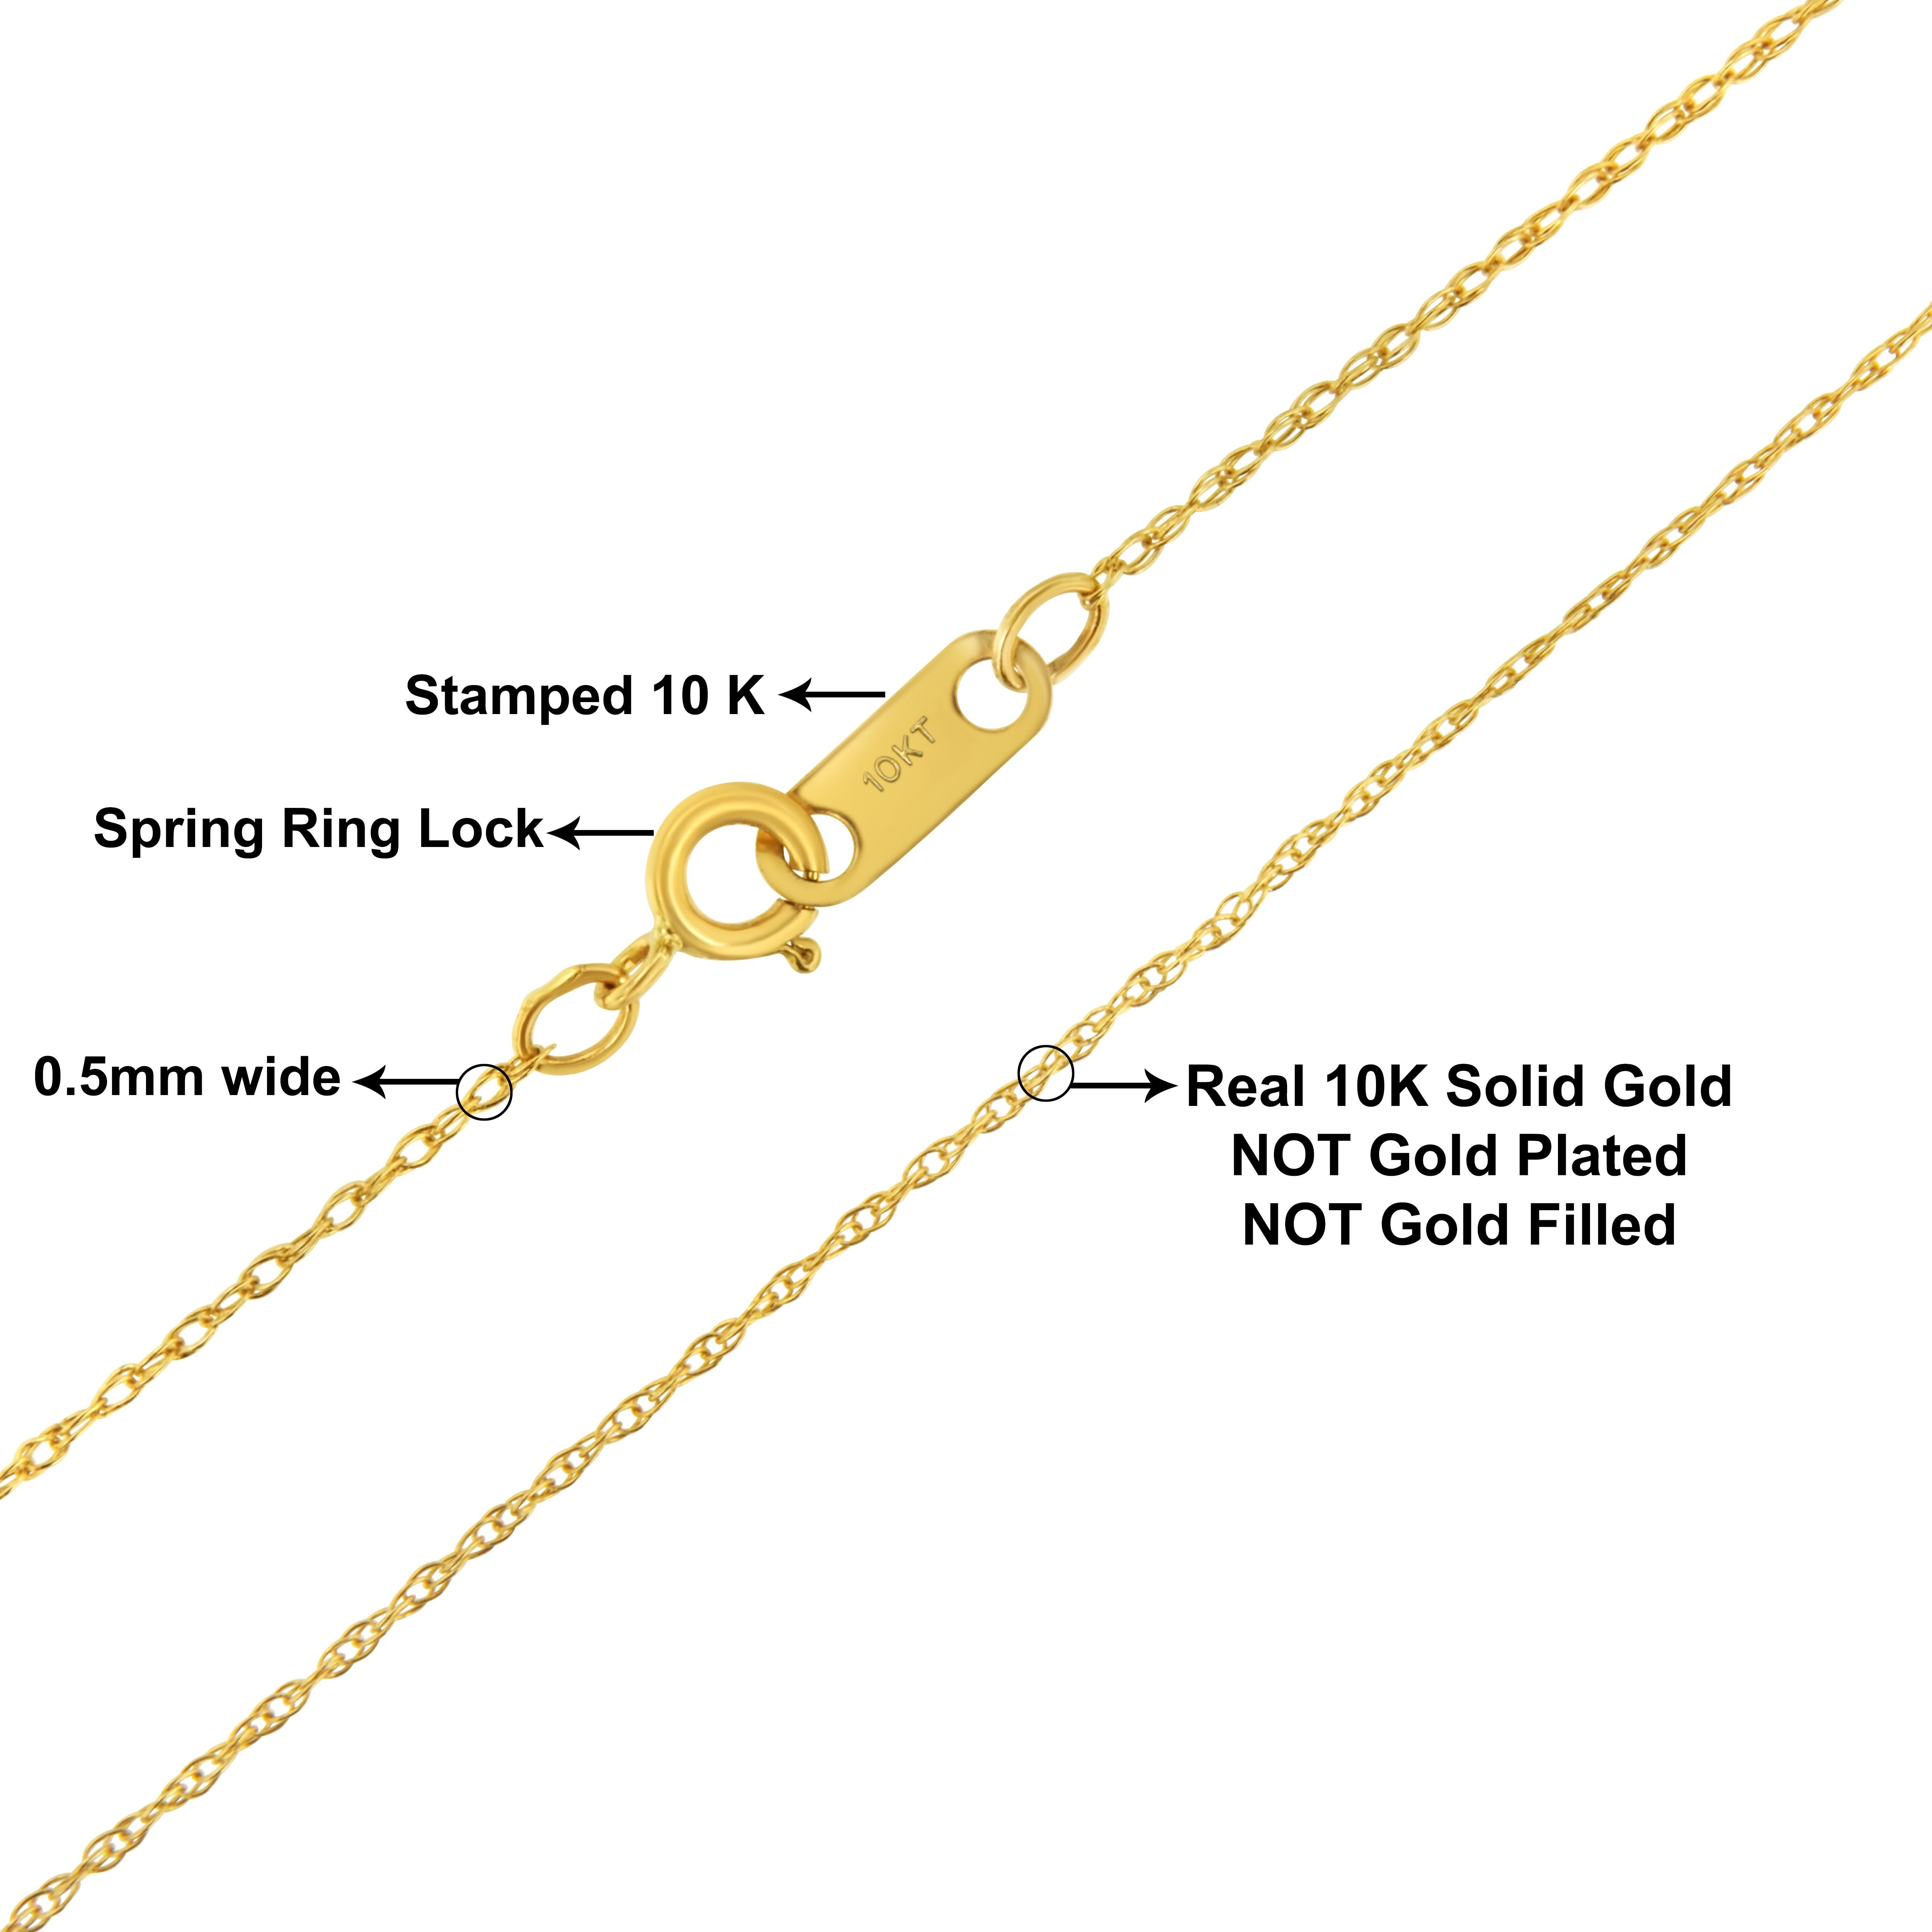 A simple and dainty 10K yellow gold rope chain measuring 20 inches in length and securing with a standard spring ring clasp. This chain will replace most basic promotional chains and is great for small to mid size pendants. The chain measures